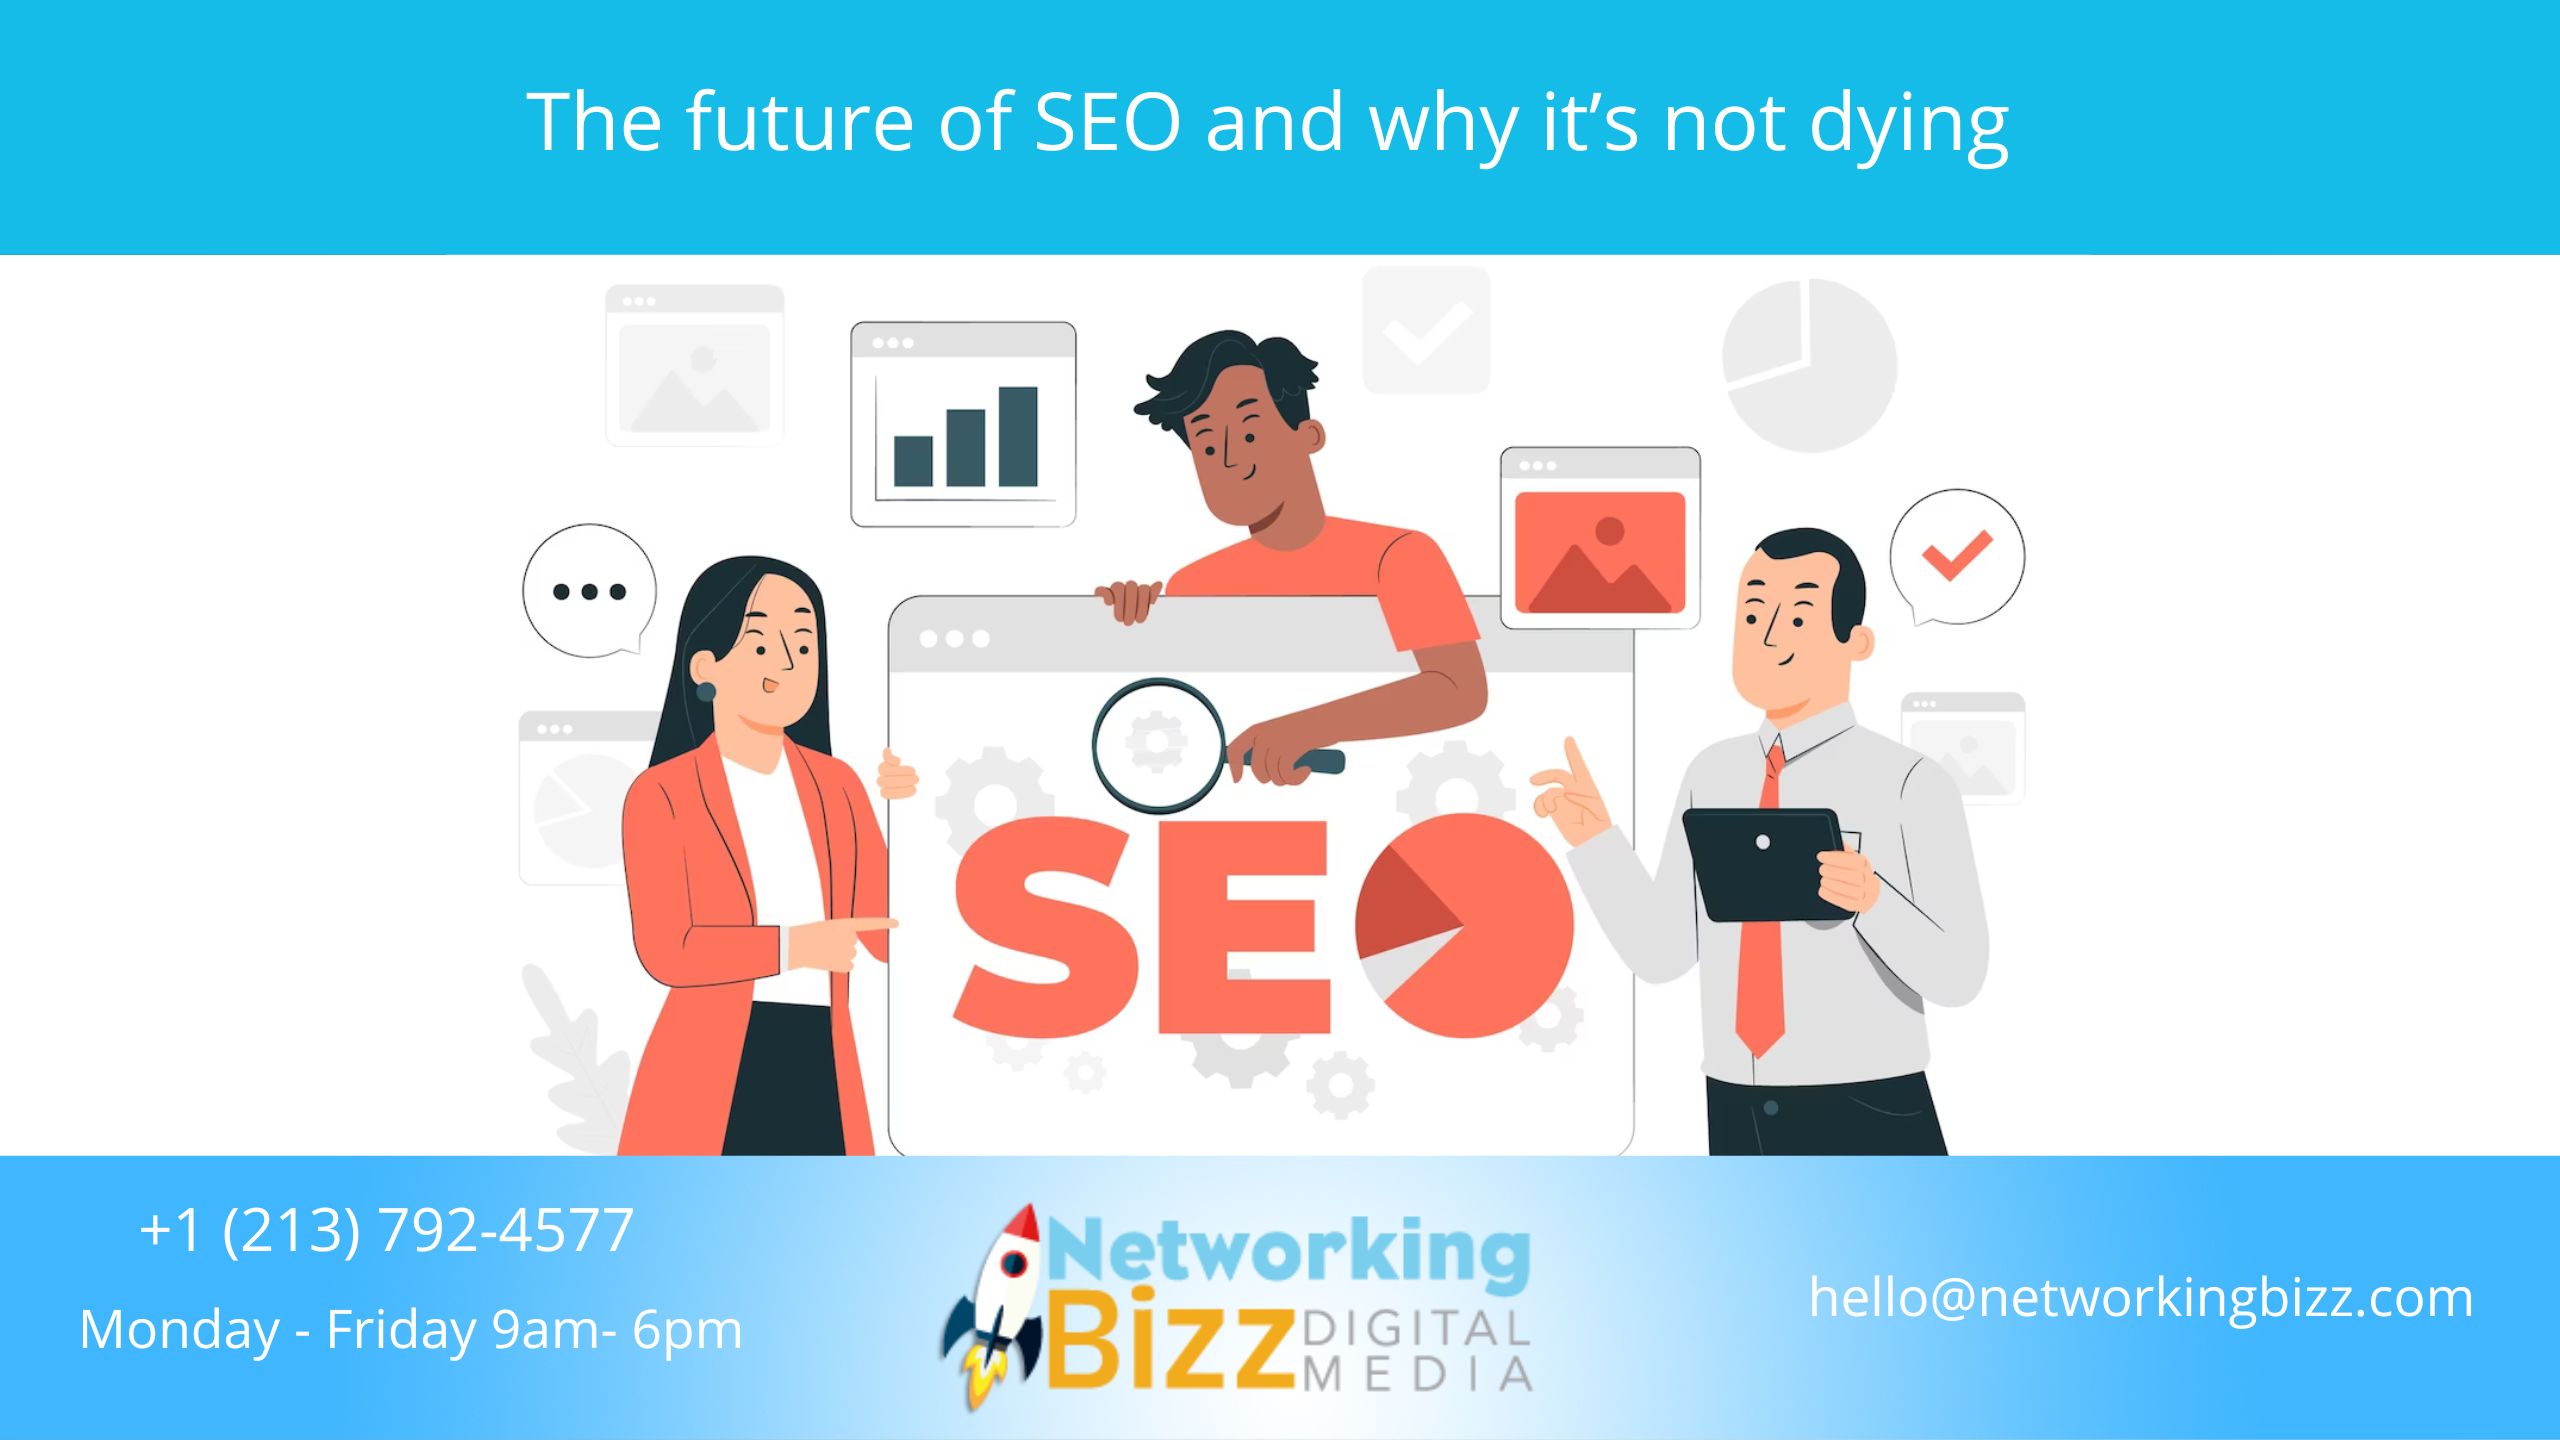 The future of SEO and why it’s not dying